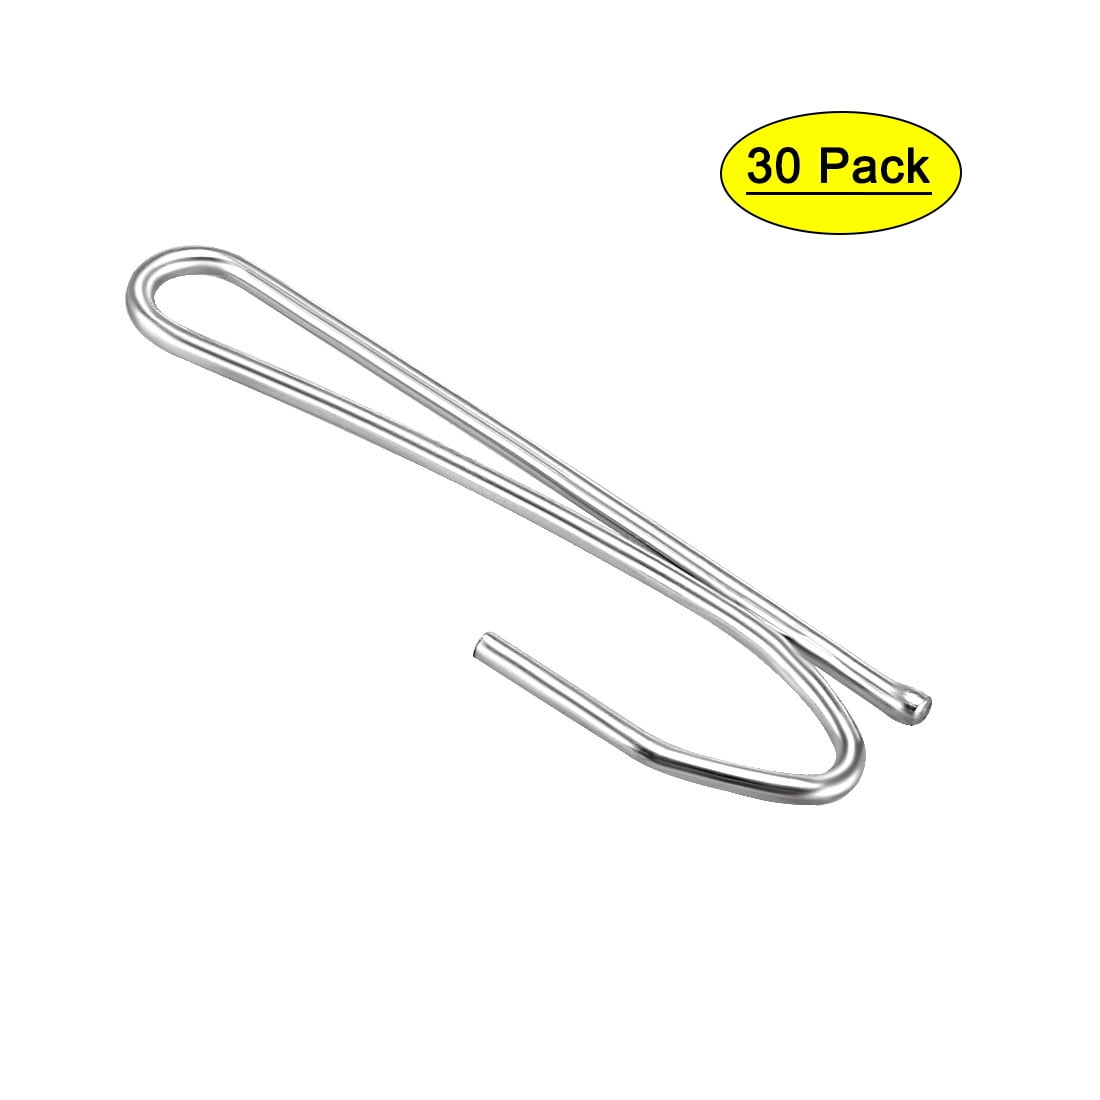 30pc Stainless Steel Curtain Pleat Hooks,Drapery Hook and Pin for Pleated Drapes 4 Prongs Pinch Pleat Hook Clips,Traverse Pleater 4 End Curtain